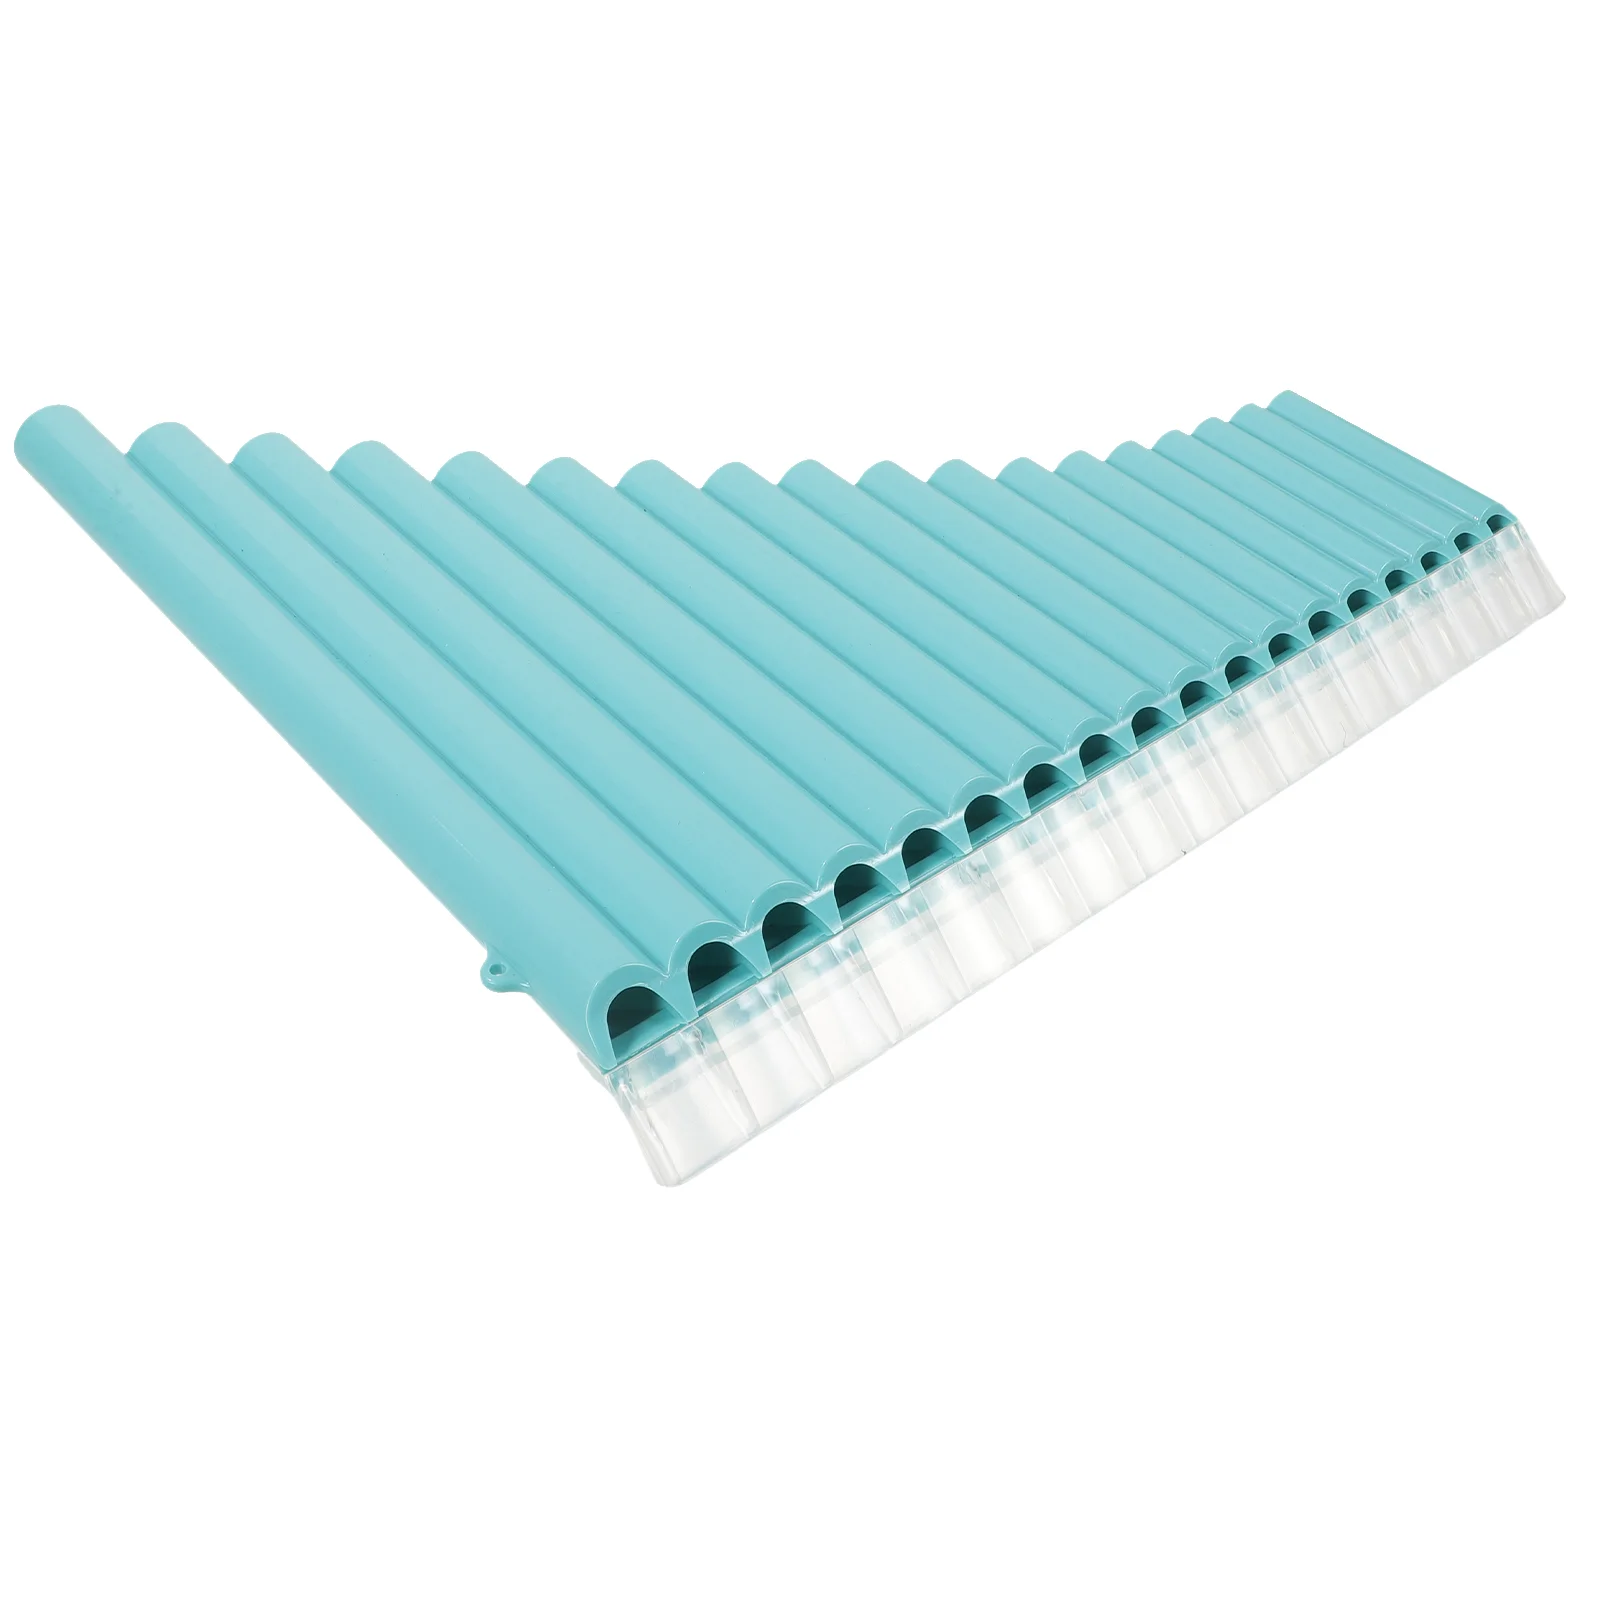 

Pan Flute Traditional Instrument Panpipe Beginners Calandria Flutes School Musical Abs Resin Student